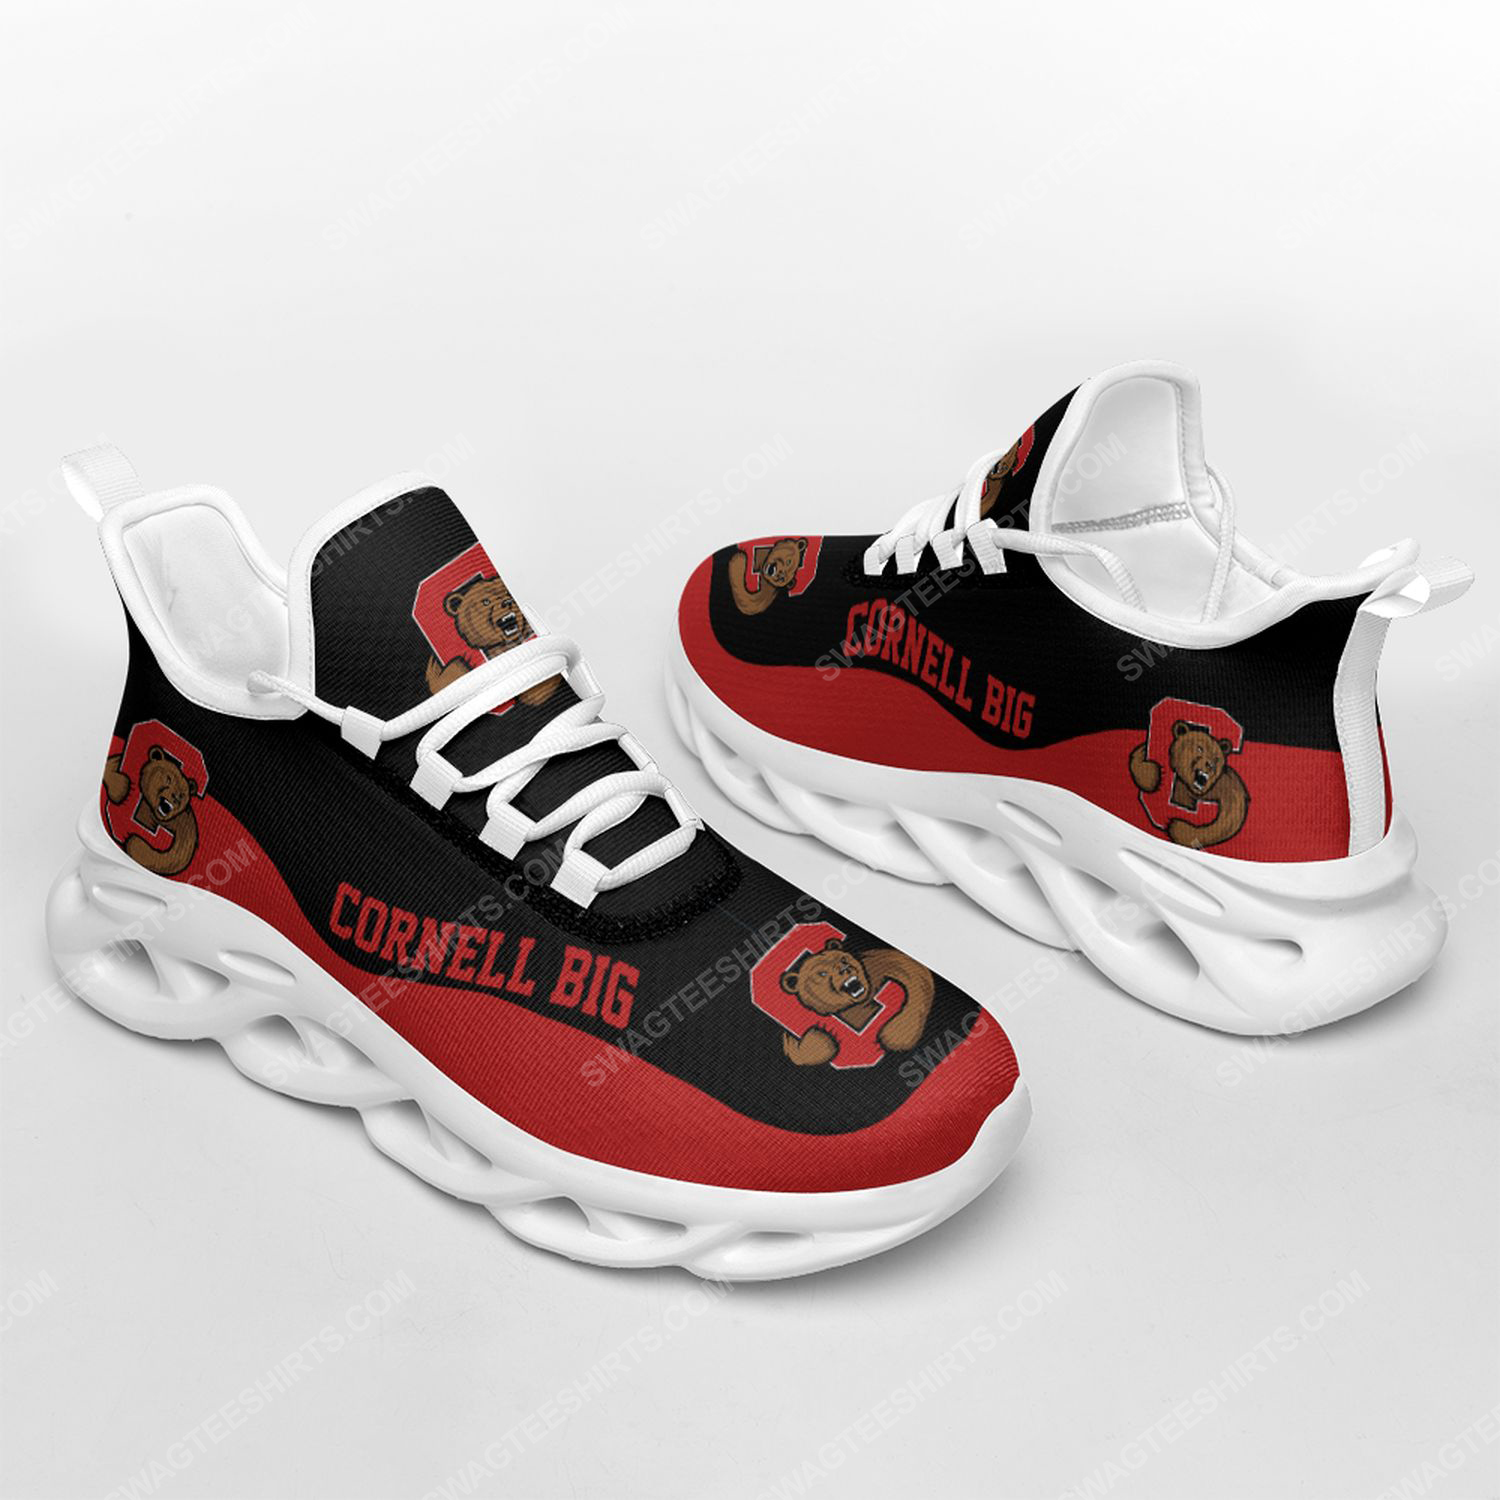 The cornell big red football team max soul shoes 2